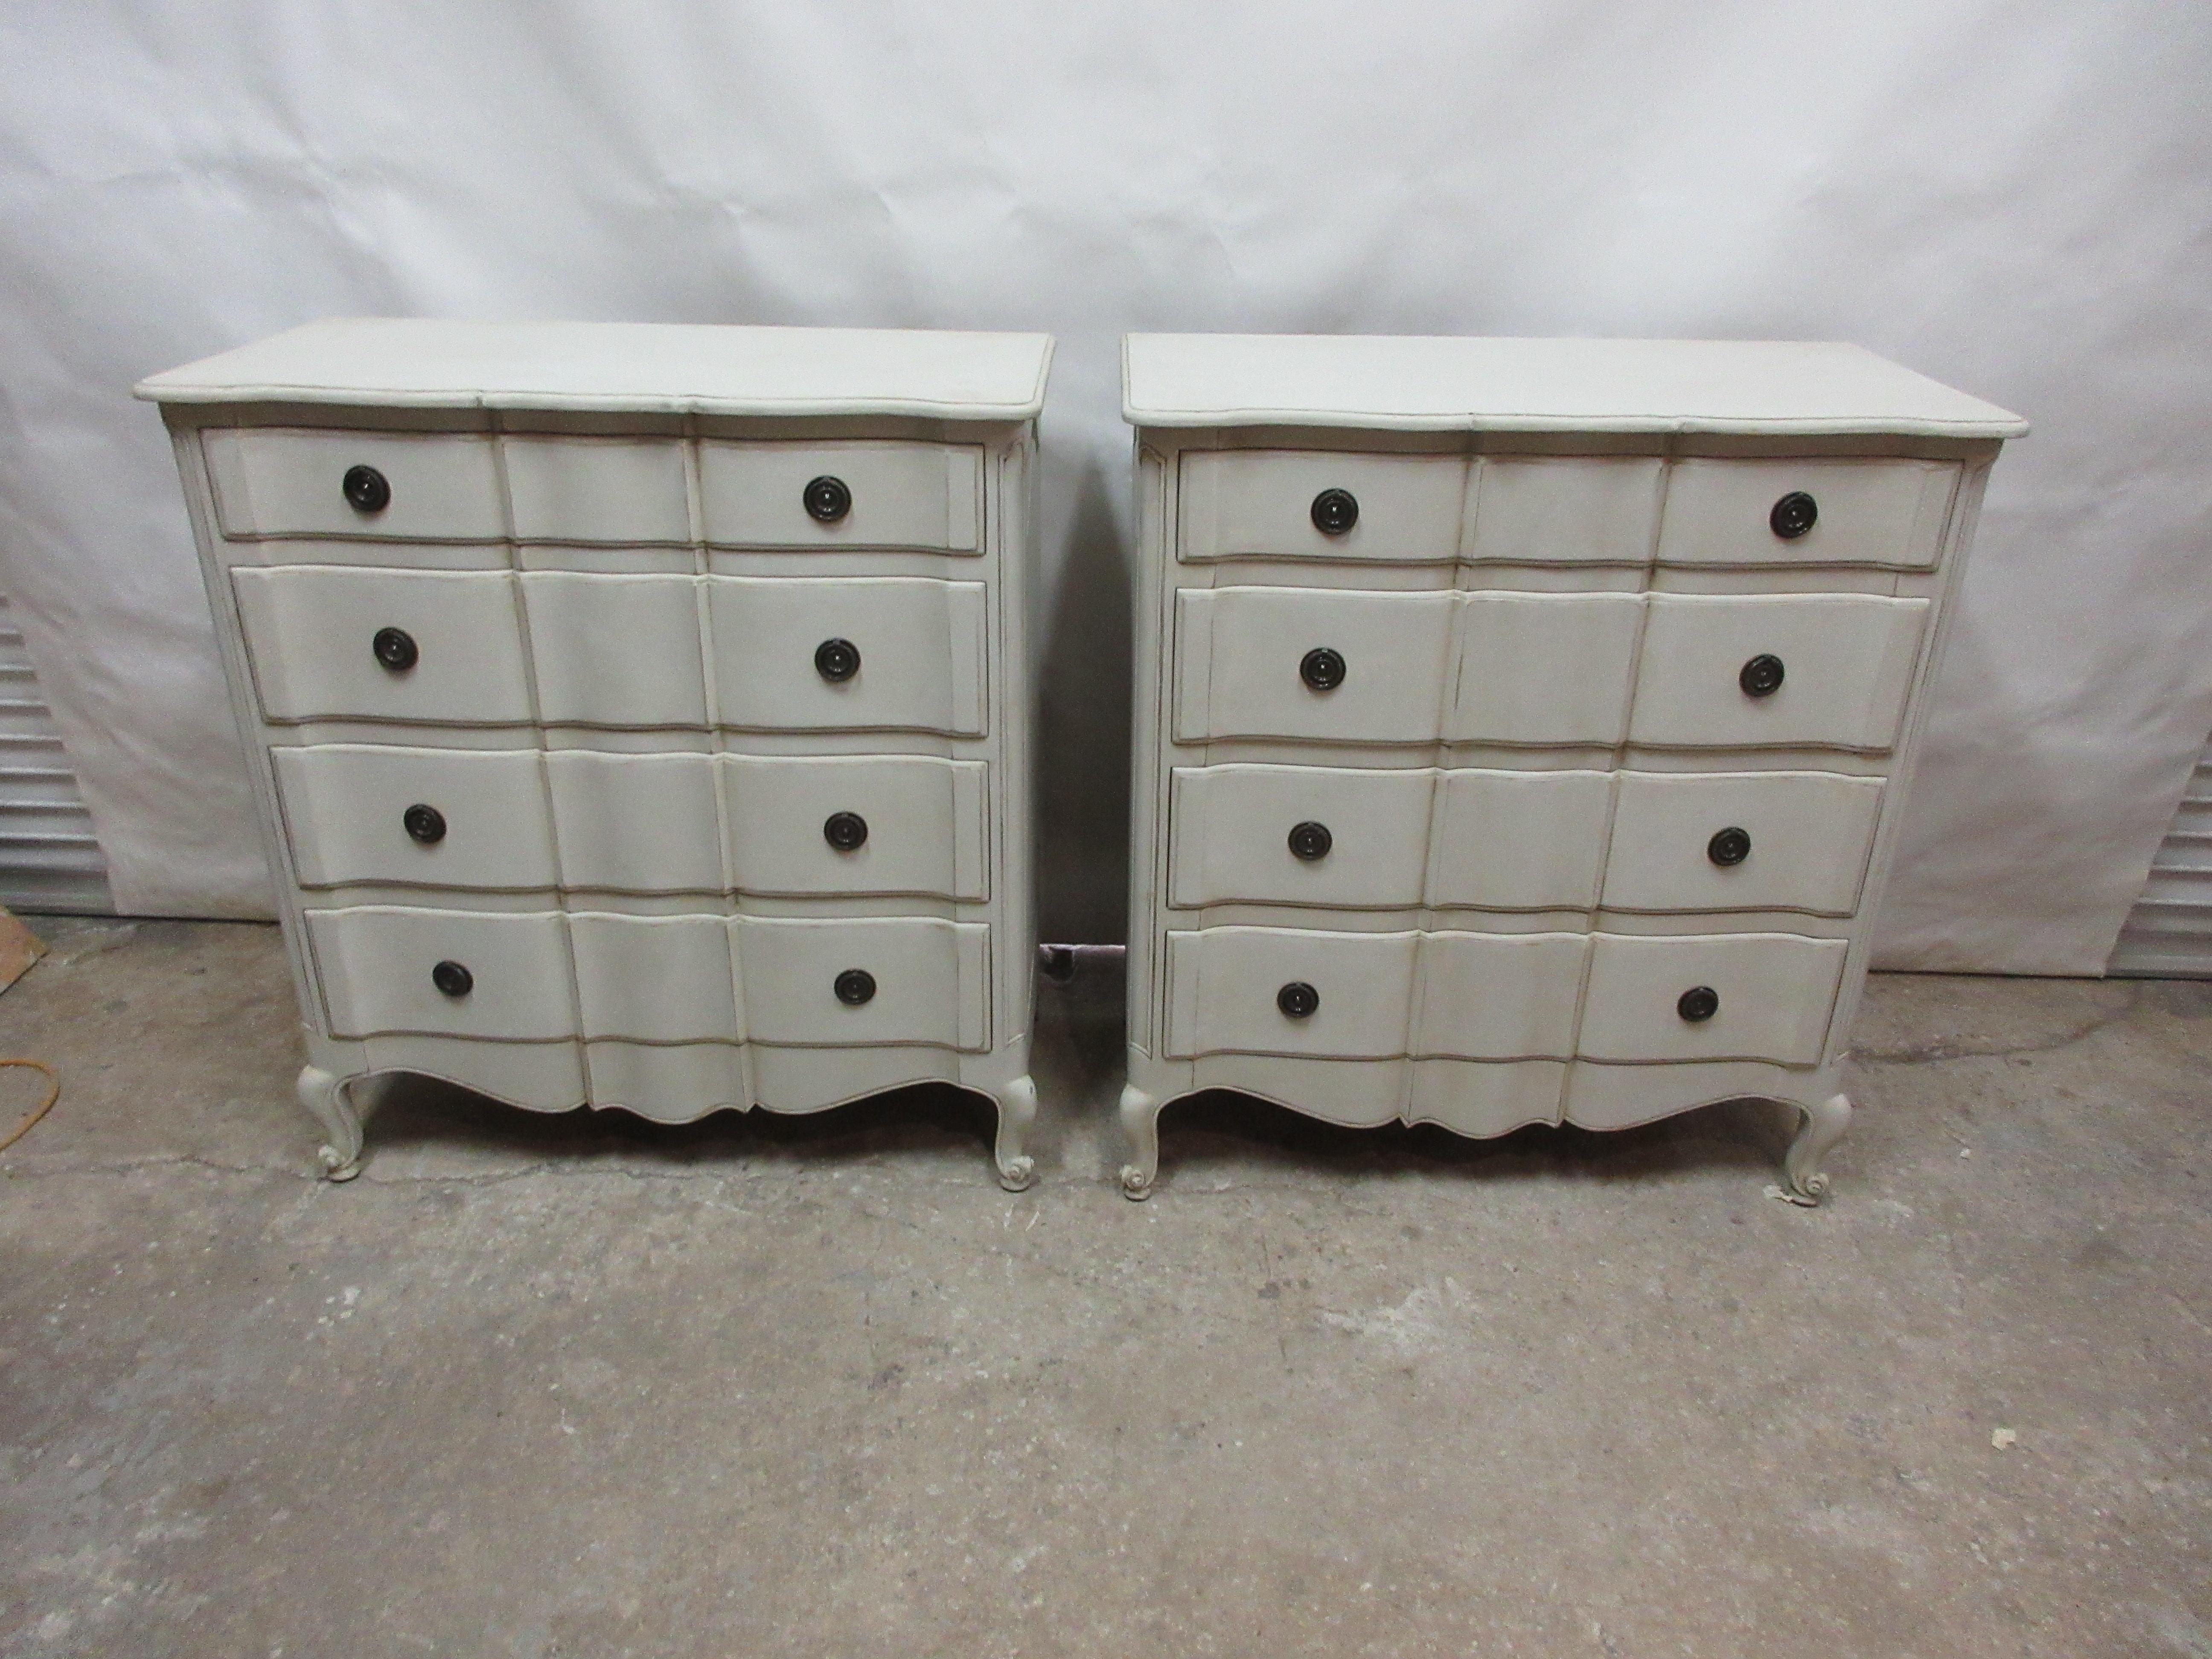 This is an unusual set of 2 Rococo style 4 drawer chest. They have been restored and repainted with Milk Paints 